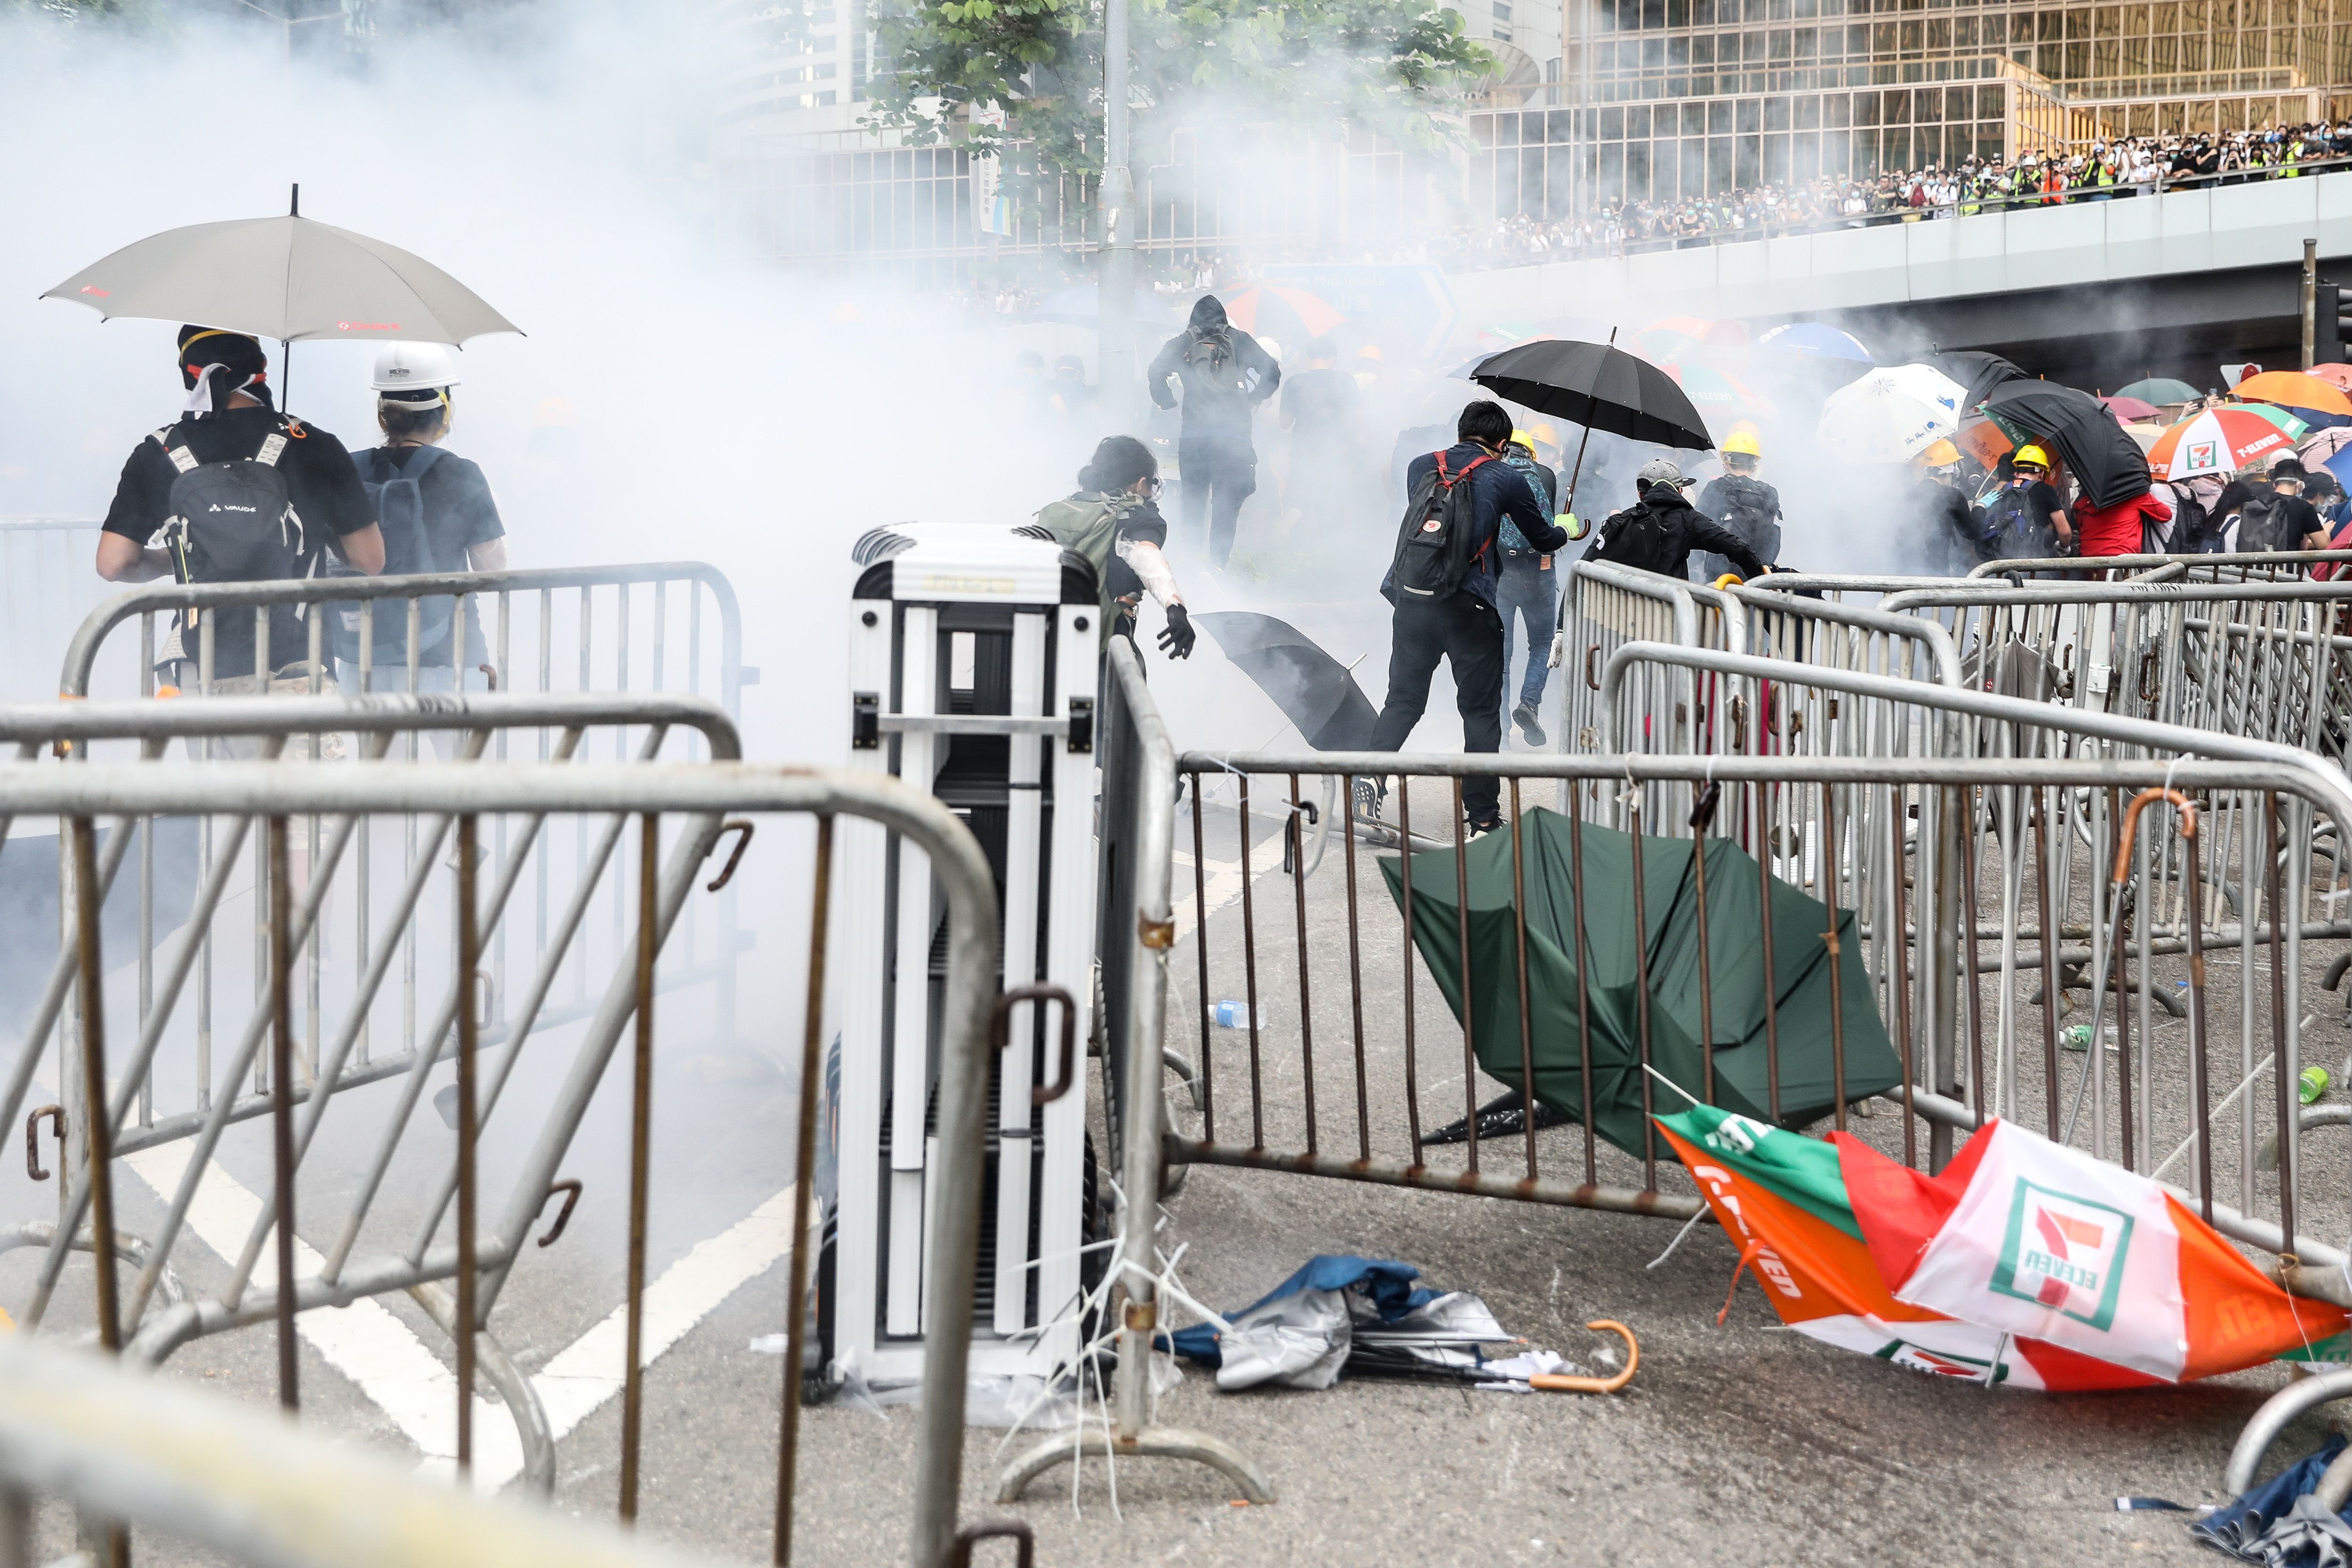 Protesters retreat after police fired tear gas during a rally against a controversial extradition law proposal outside the government headquarters in Hong Kong on June 12,